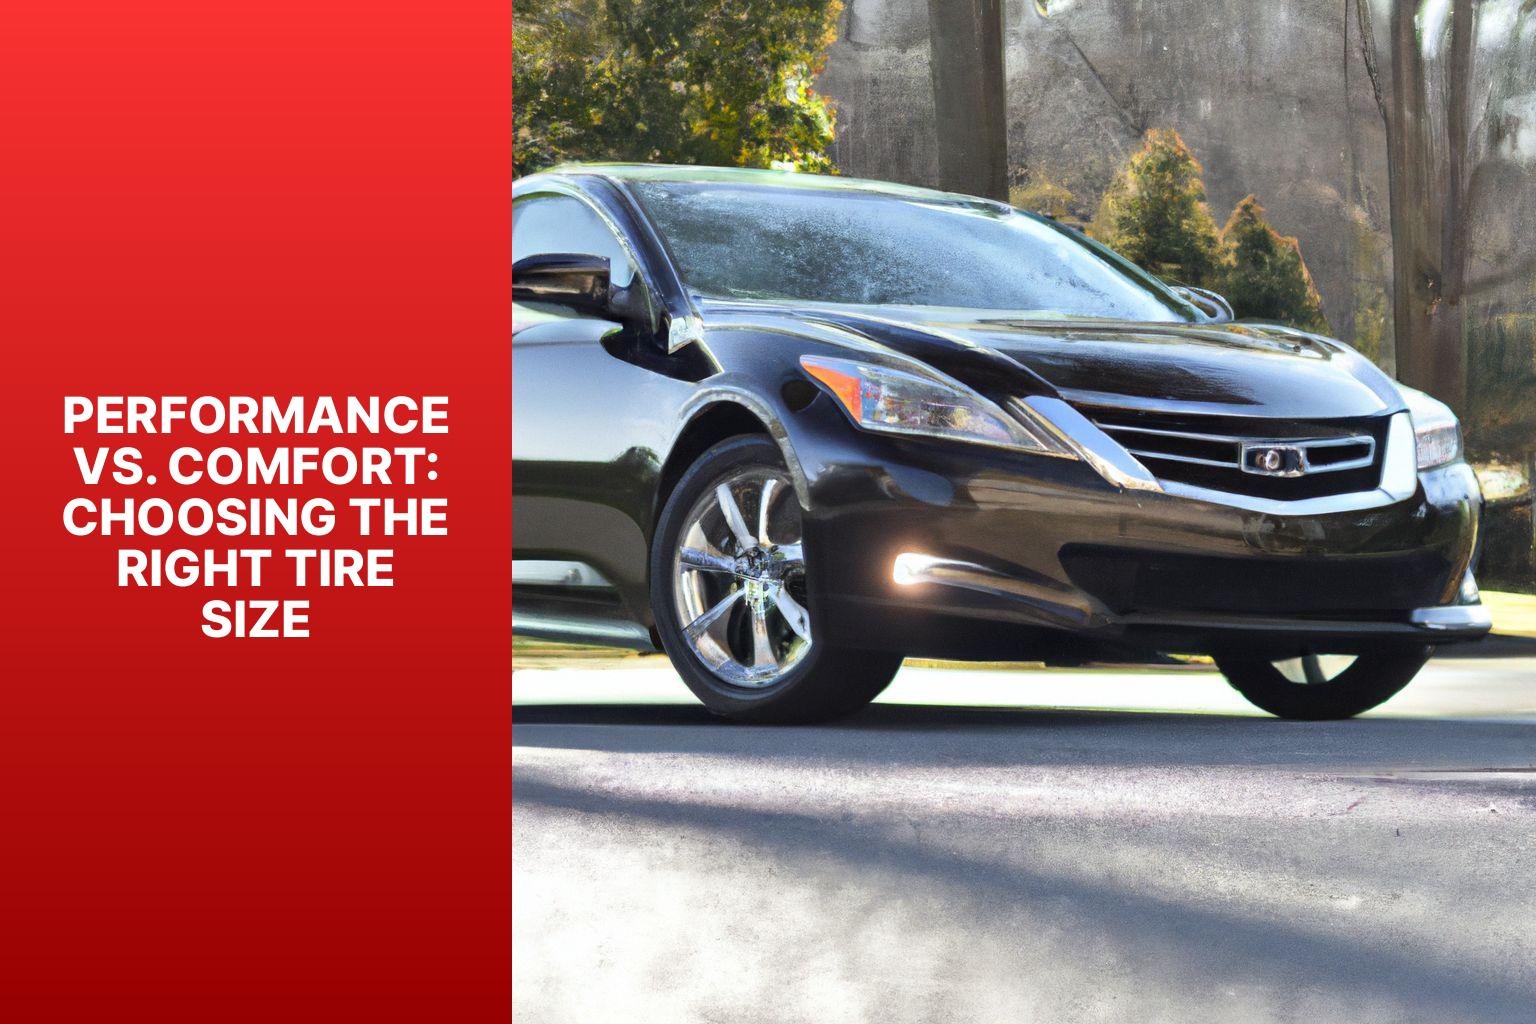 Performance vs. Comfort: Choosing the Right Tire Size - Balancing Performance and Comfort: 2015 Nissan Altima Tire Sizes 